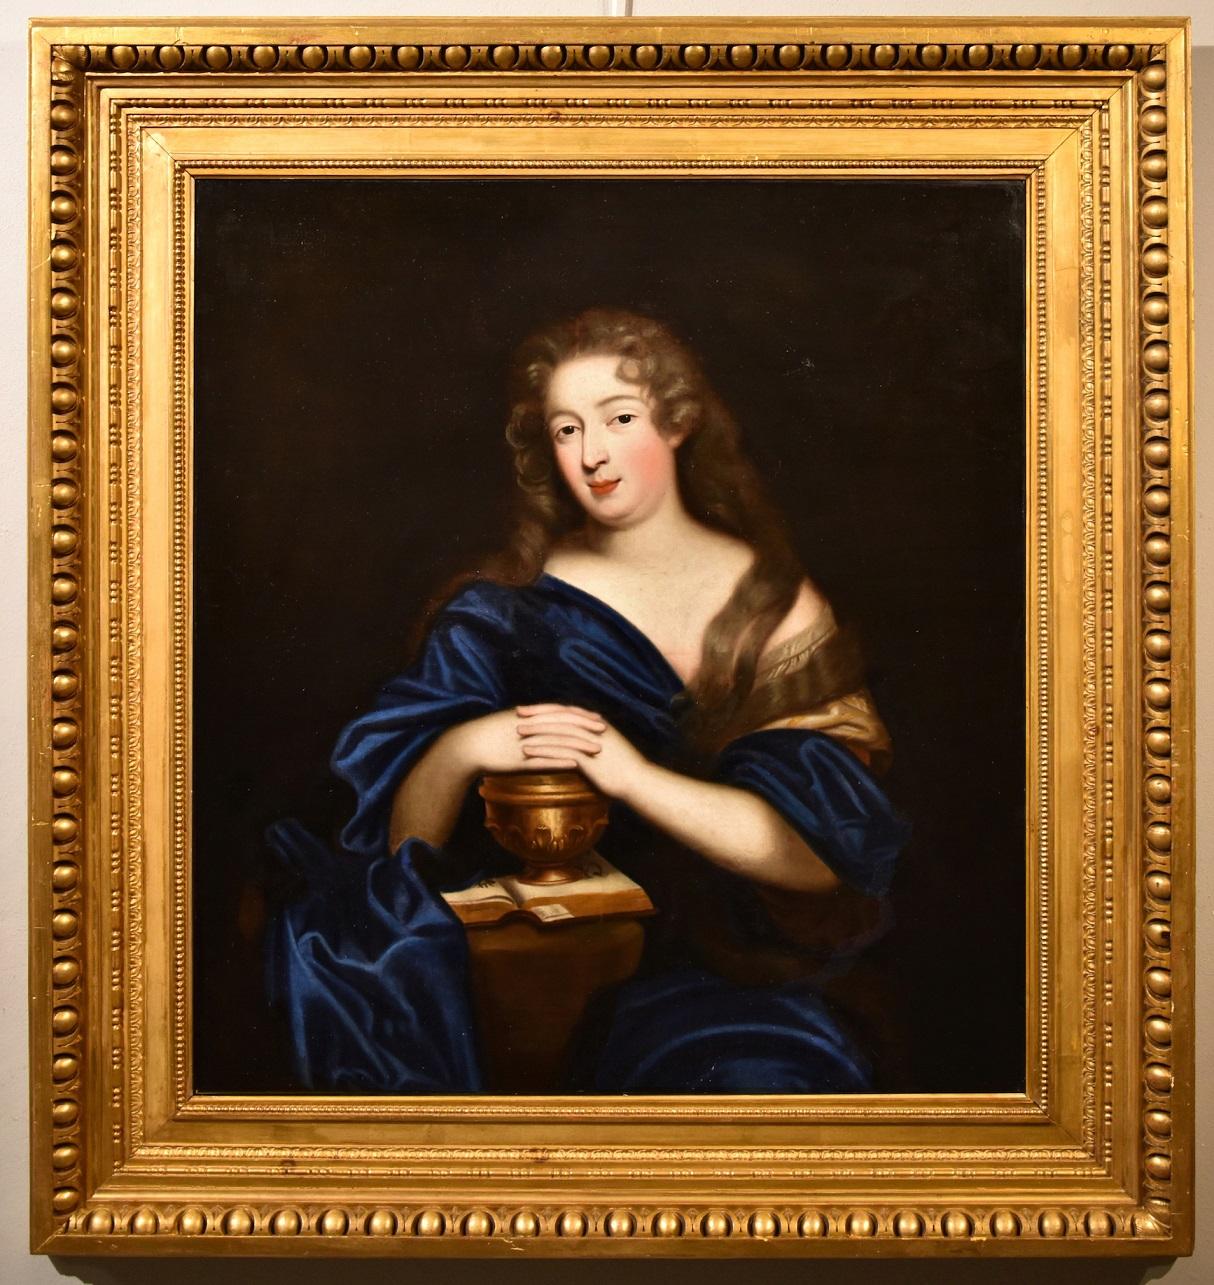 Pierre Mignard, known as Le Romain (Troyes 1612 - Paris 1695) Portrait Painting - Portrait Mignard Paint Oil on canvsa Old master 17th Century French Lady Woman